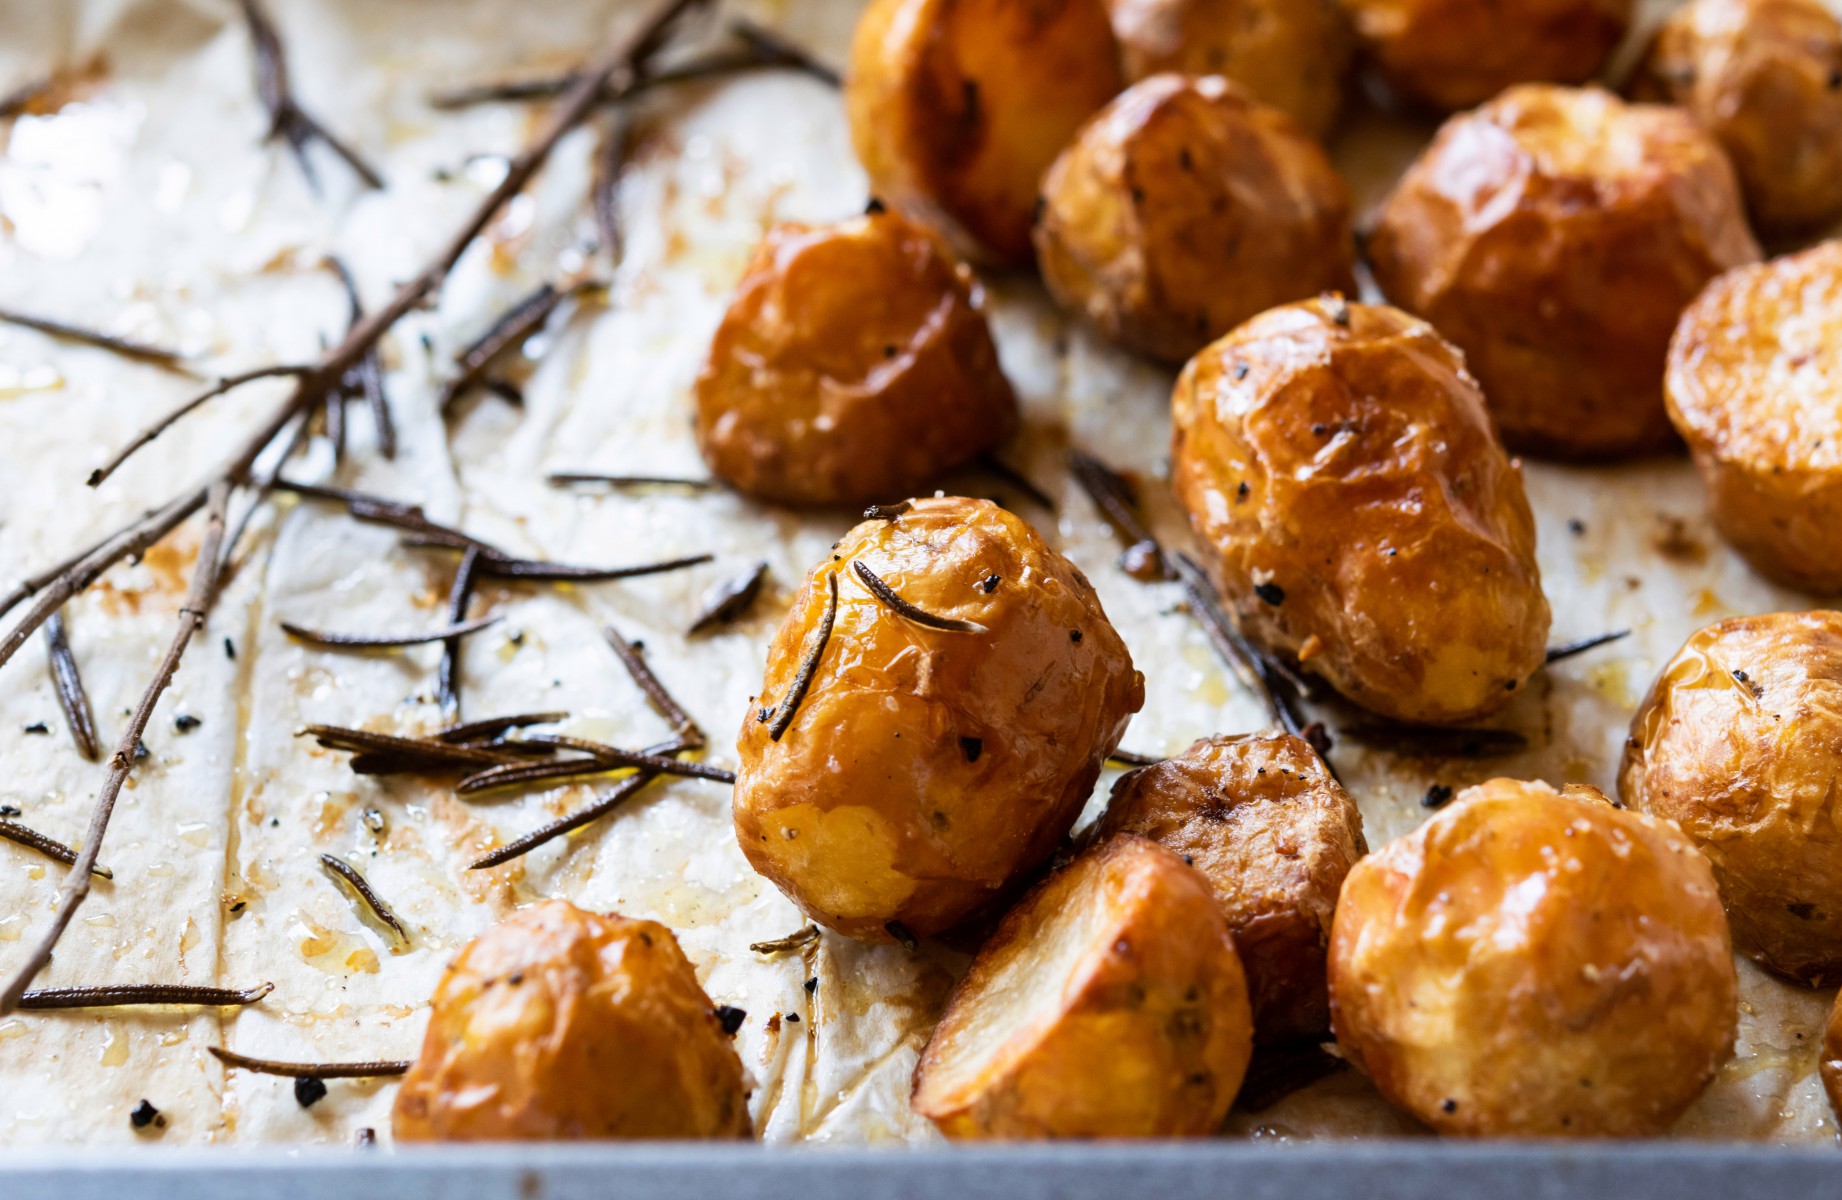 The ensure our potatoes are crispy, make sure you partially boil them before shoving them in the oven